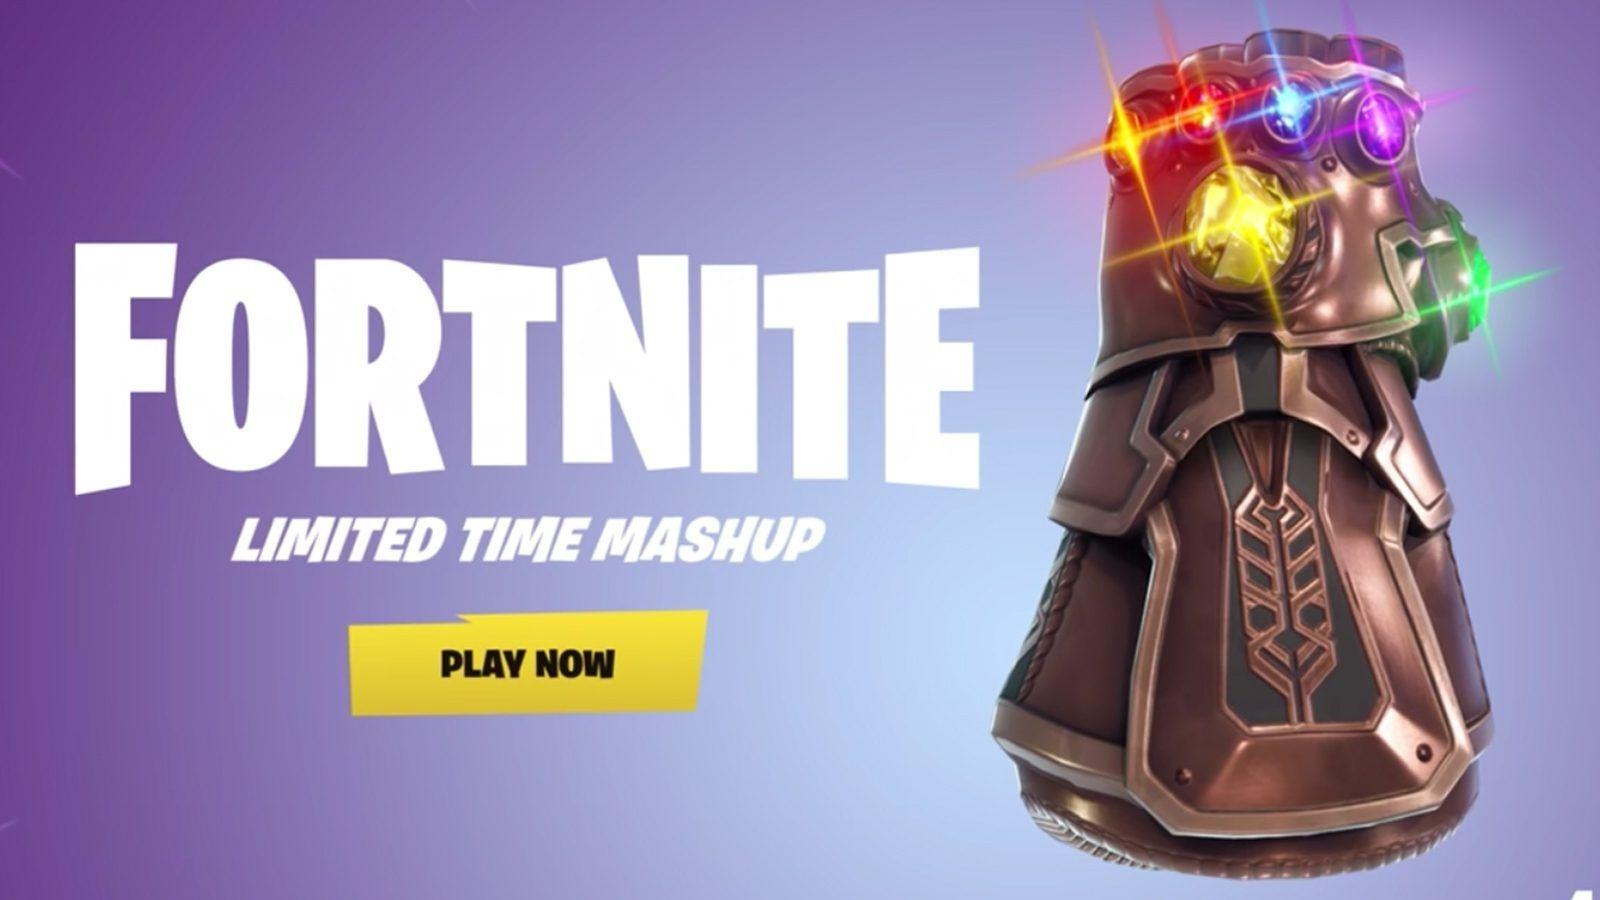 Fortnite Making Major Changes To Thanos Limted Time Mode in Fortnite